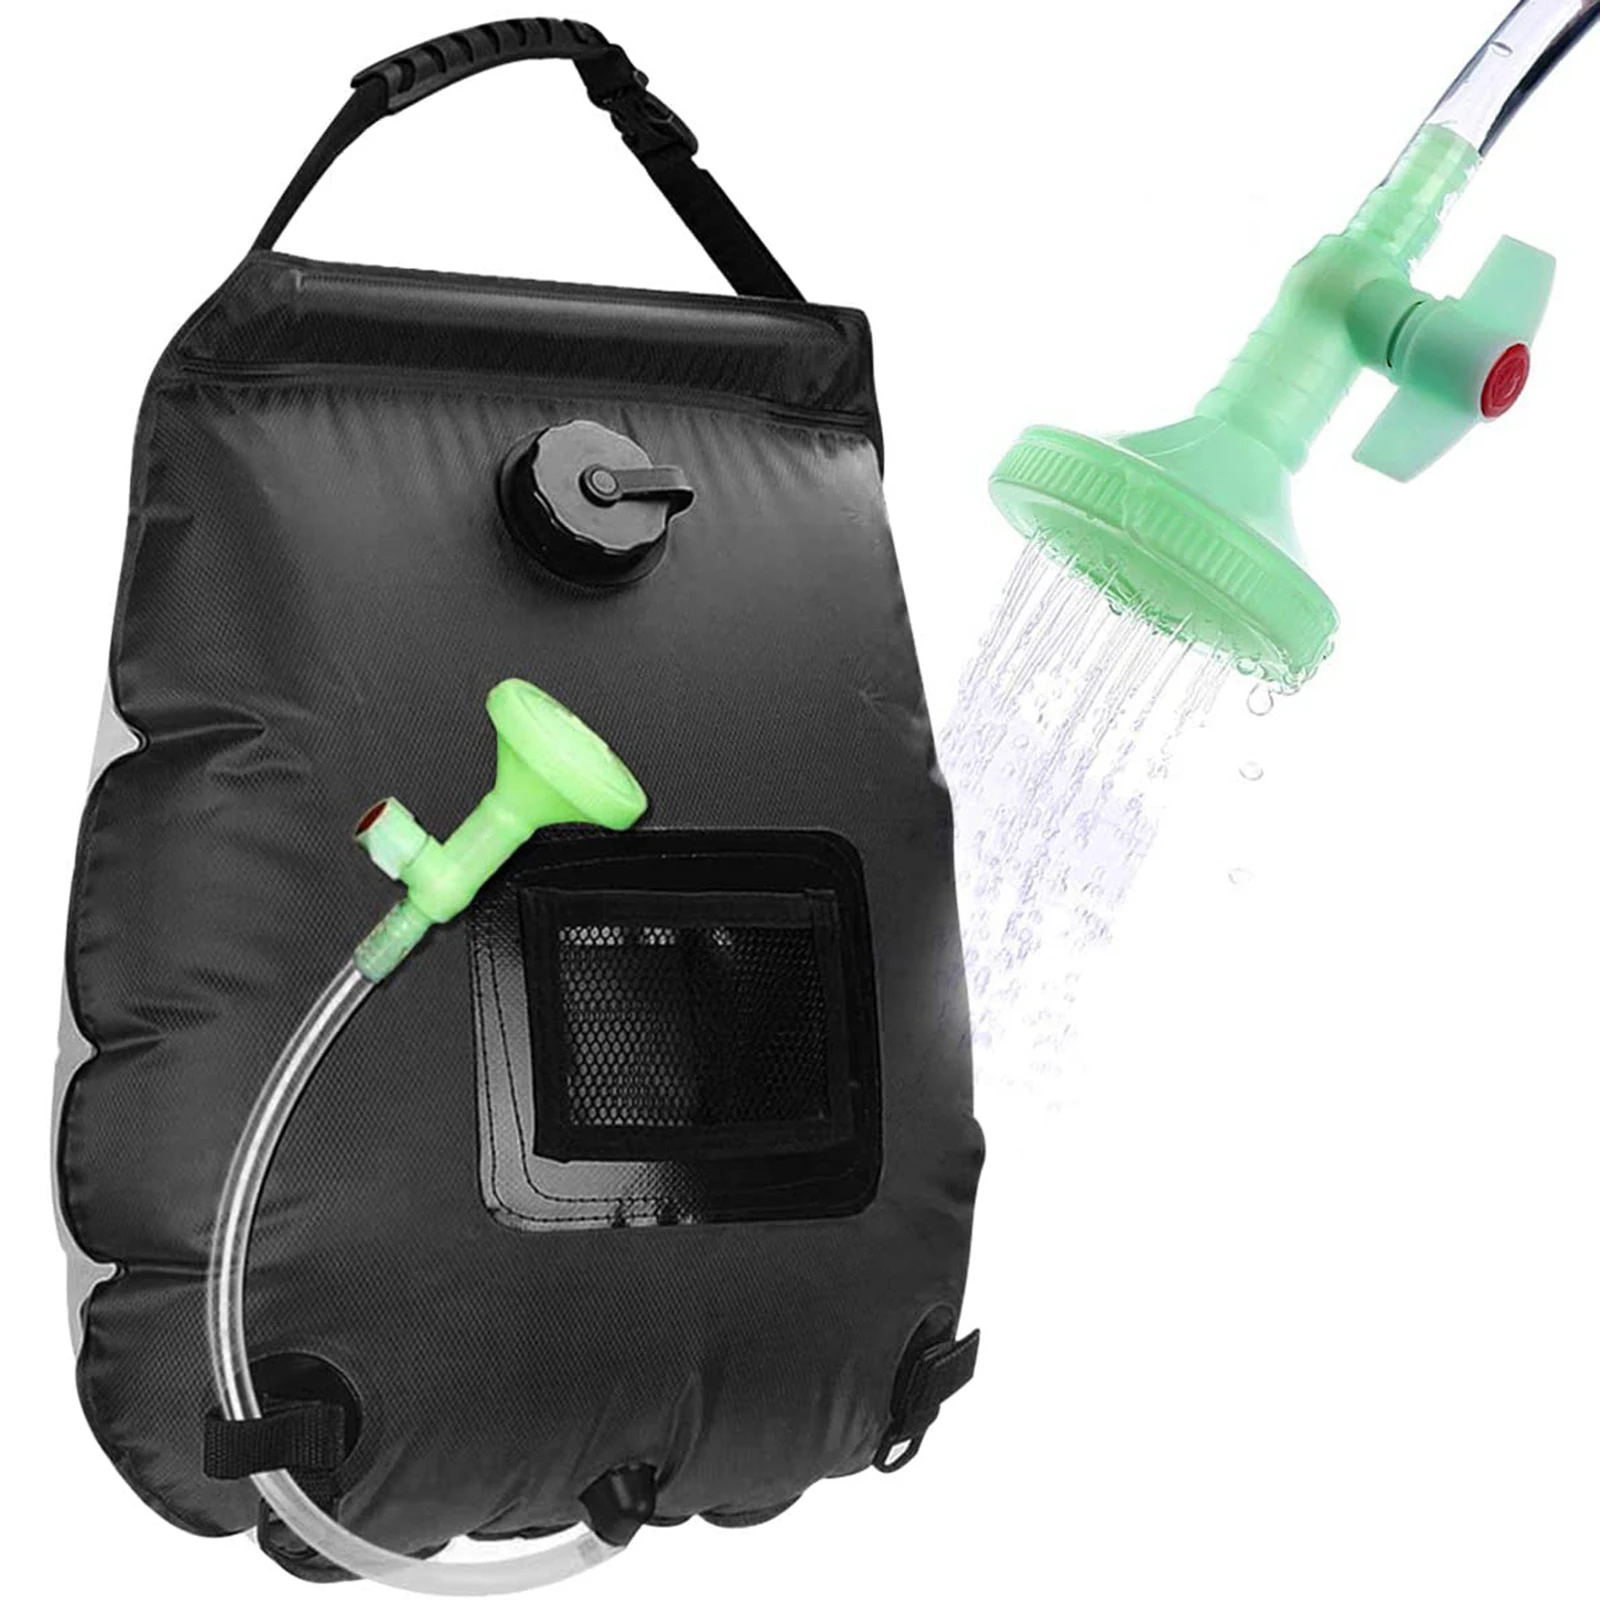 20L Water Bags Outdoor Camping Solar Shower Bag Foldable Heating Camp Shower Hiking Climbing Bath Bag Switchable Shower Head